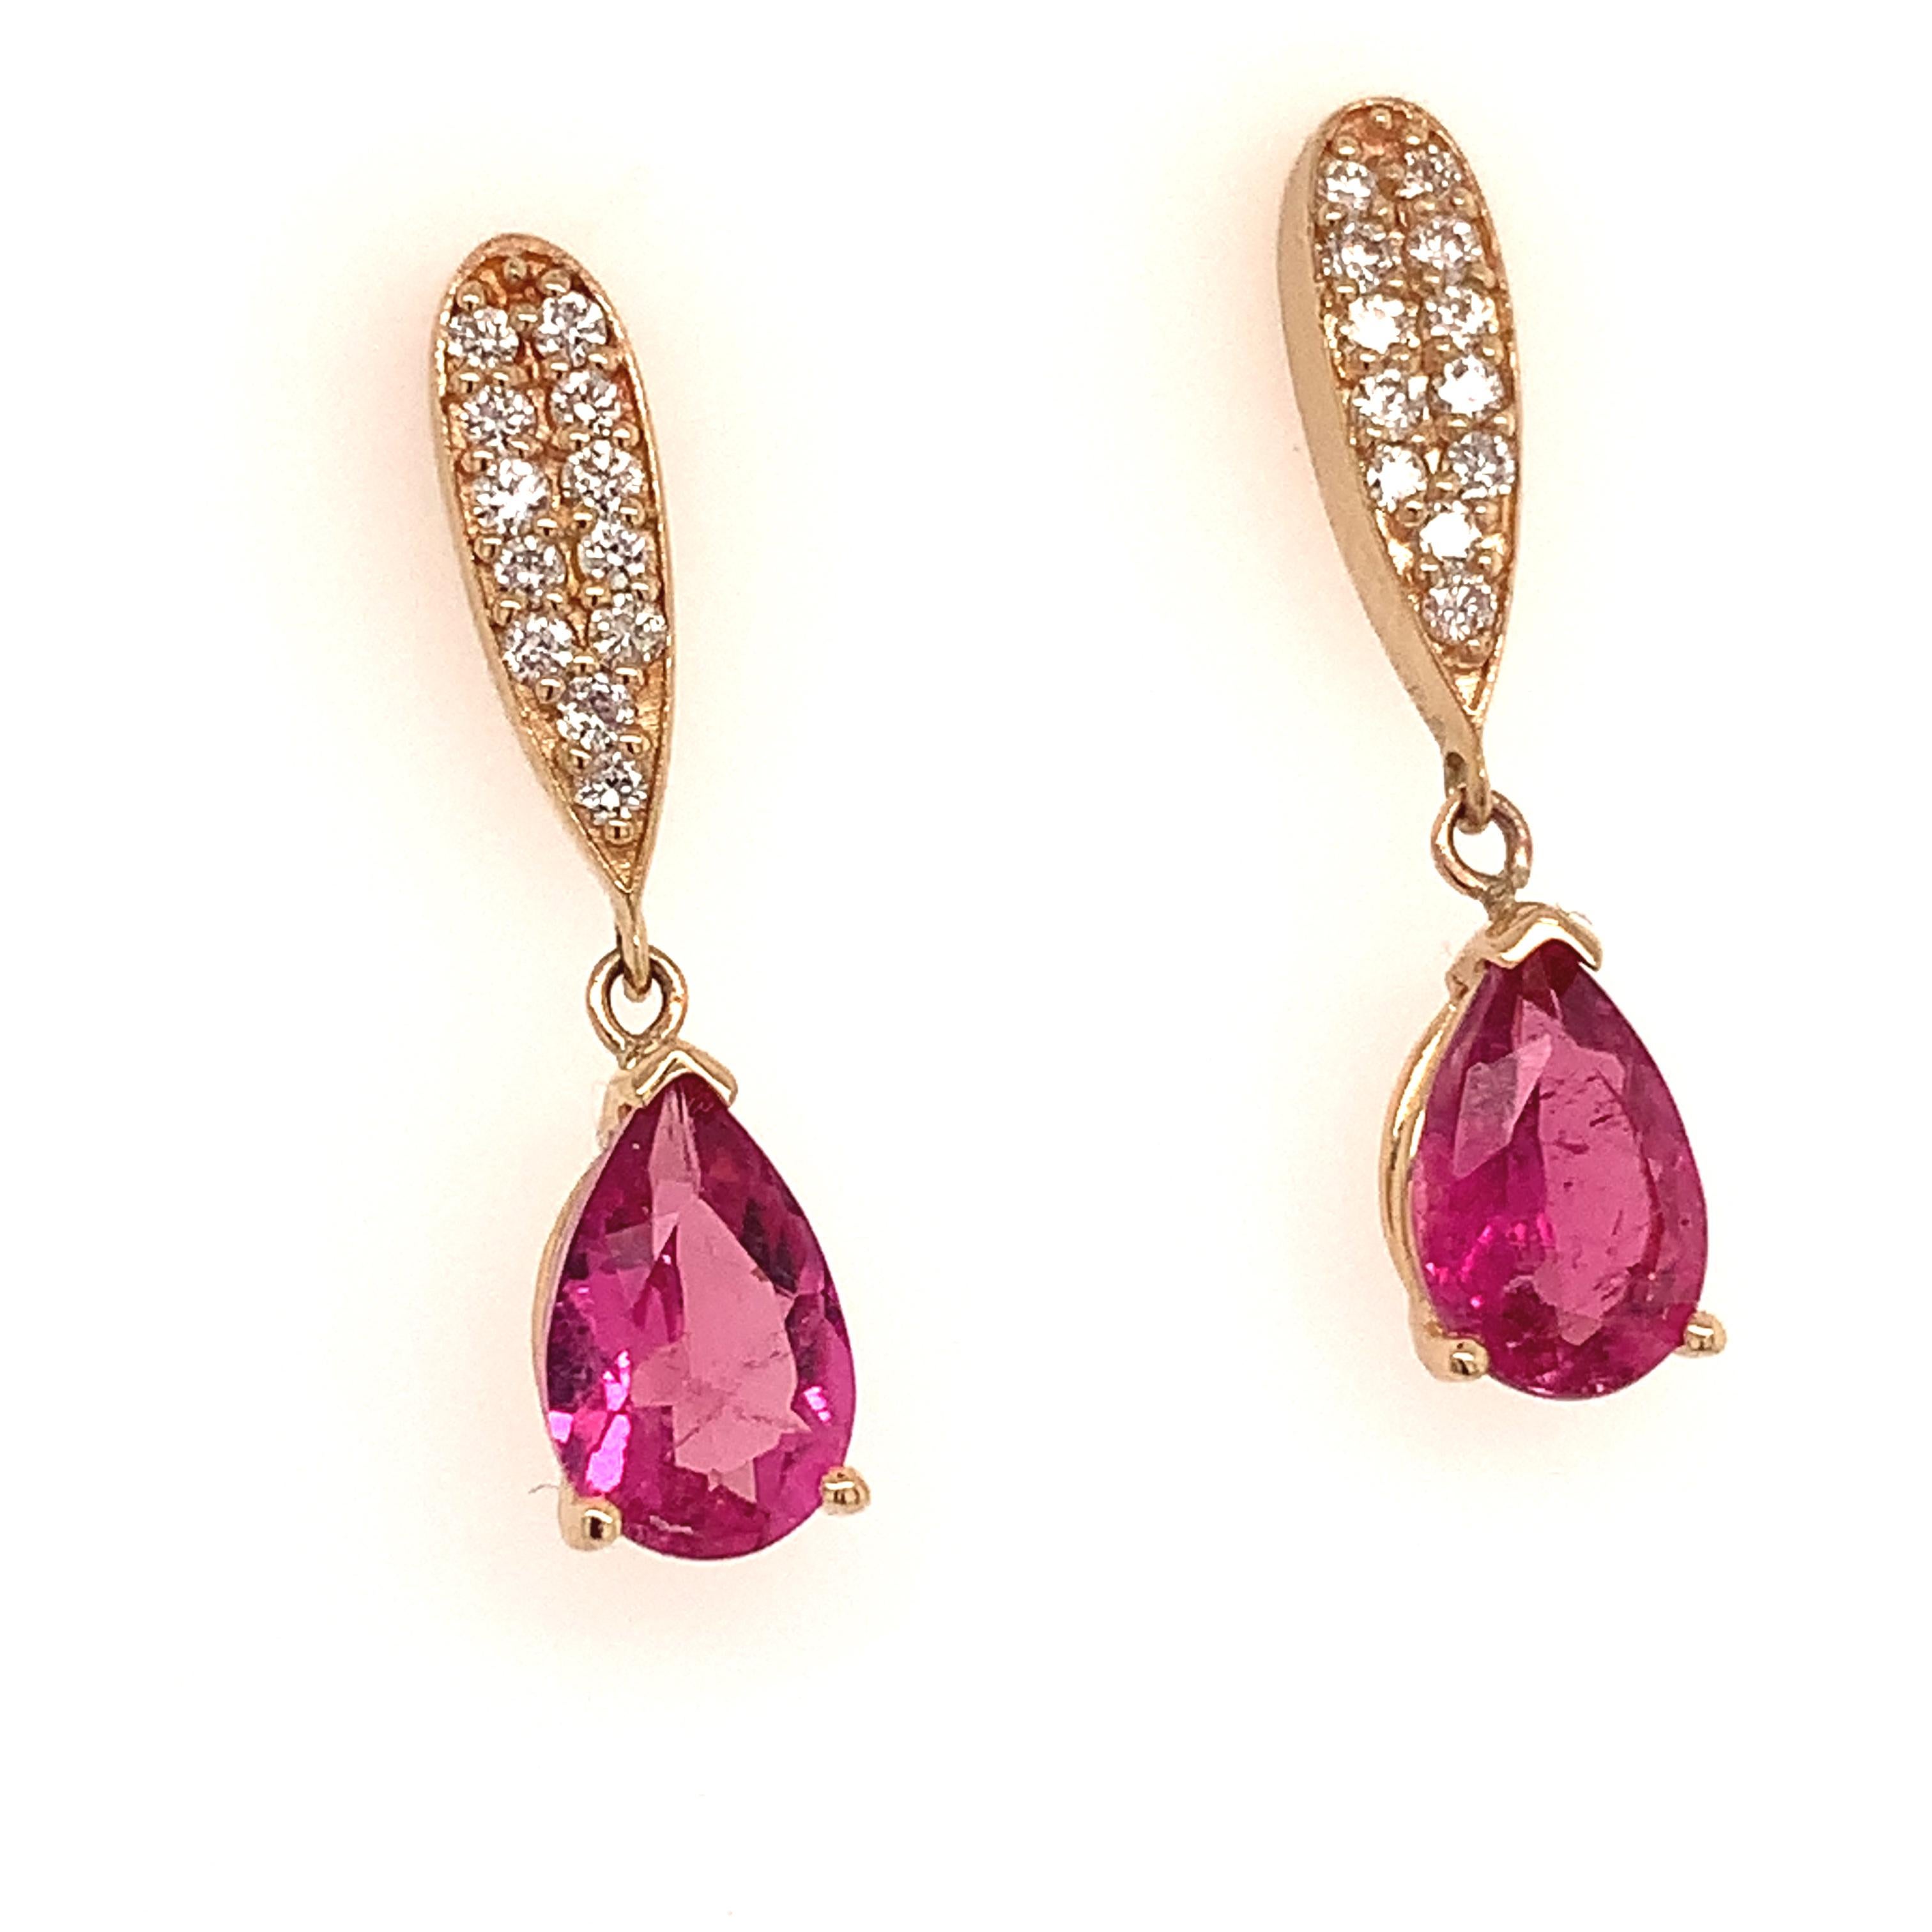 Natural Finely Faceted Quality Natural Tourmaline Rubellite Diamond Earrings 14k Gold 1.60 TCW Certified $3,090 018673

Please look at the video attached for this item. With the video you can see the movement of the item and appreciate the faceting